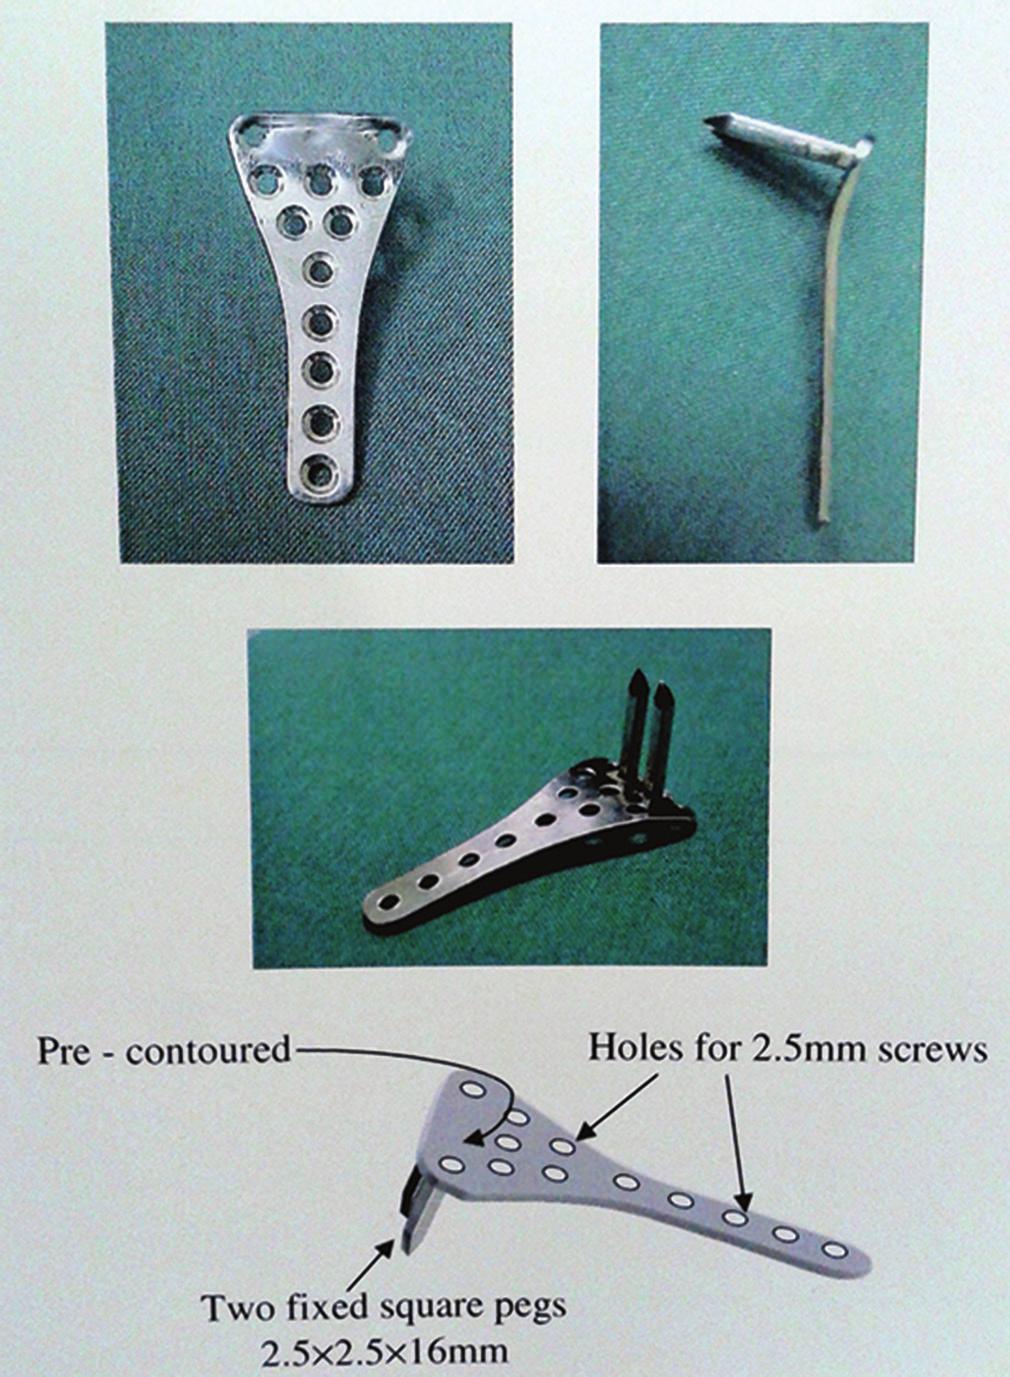 support to the comminuted distal radius, corresponding to its anatomical shape. The plate allows two 2.